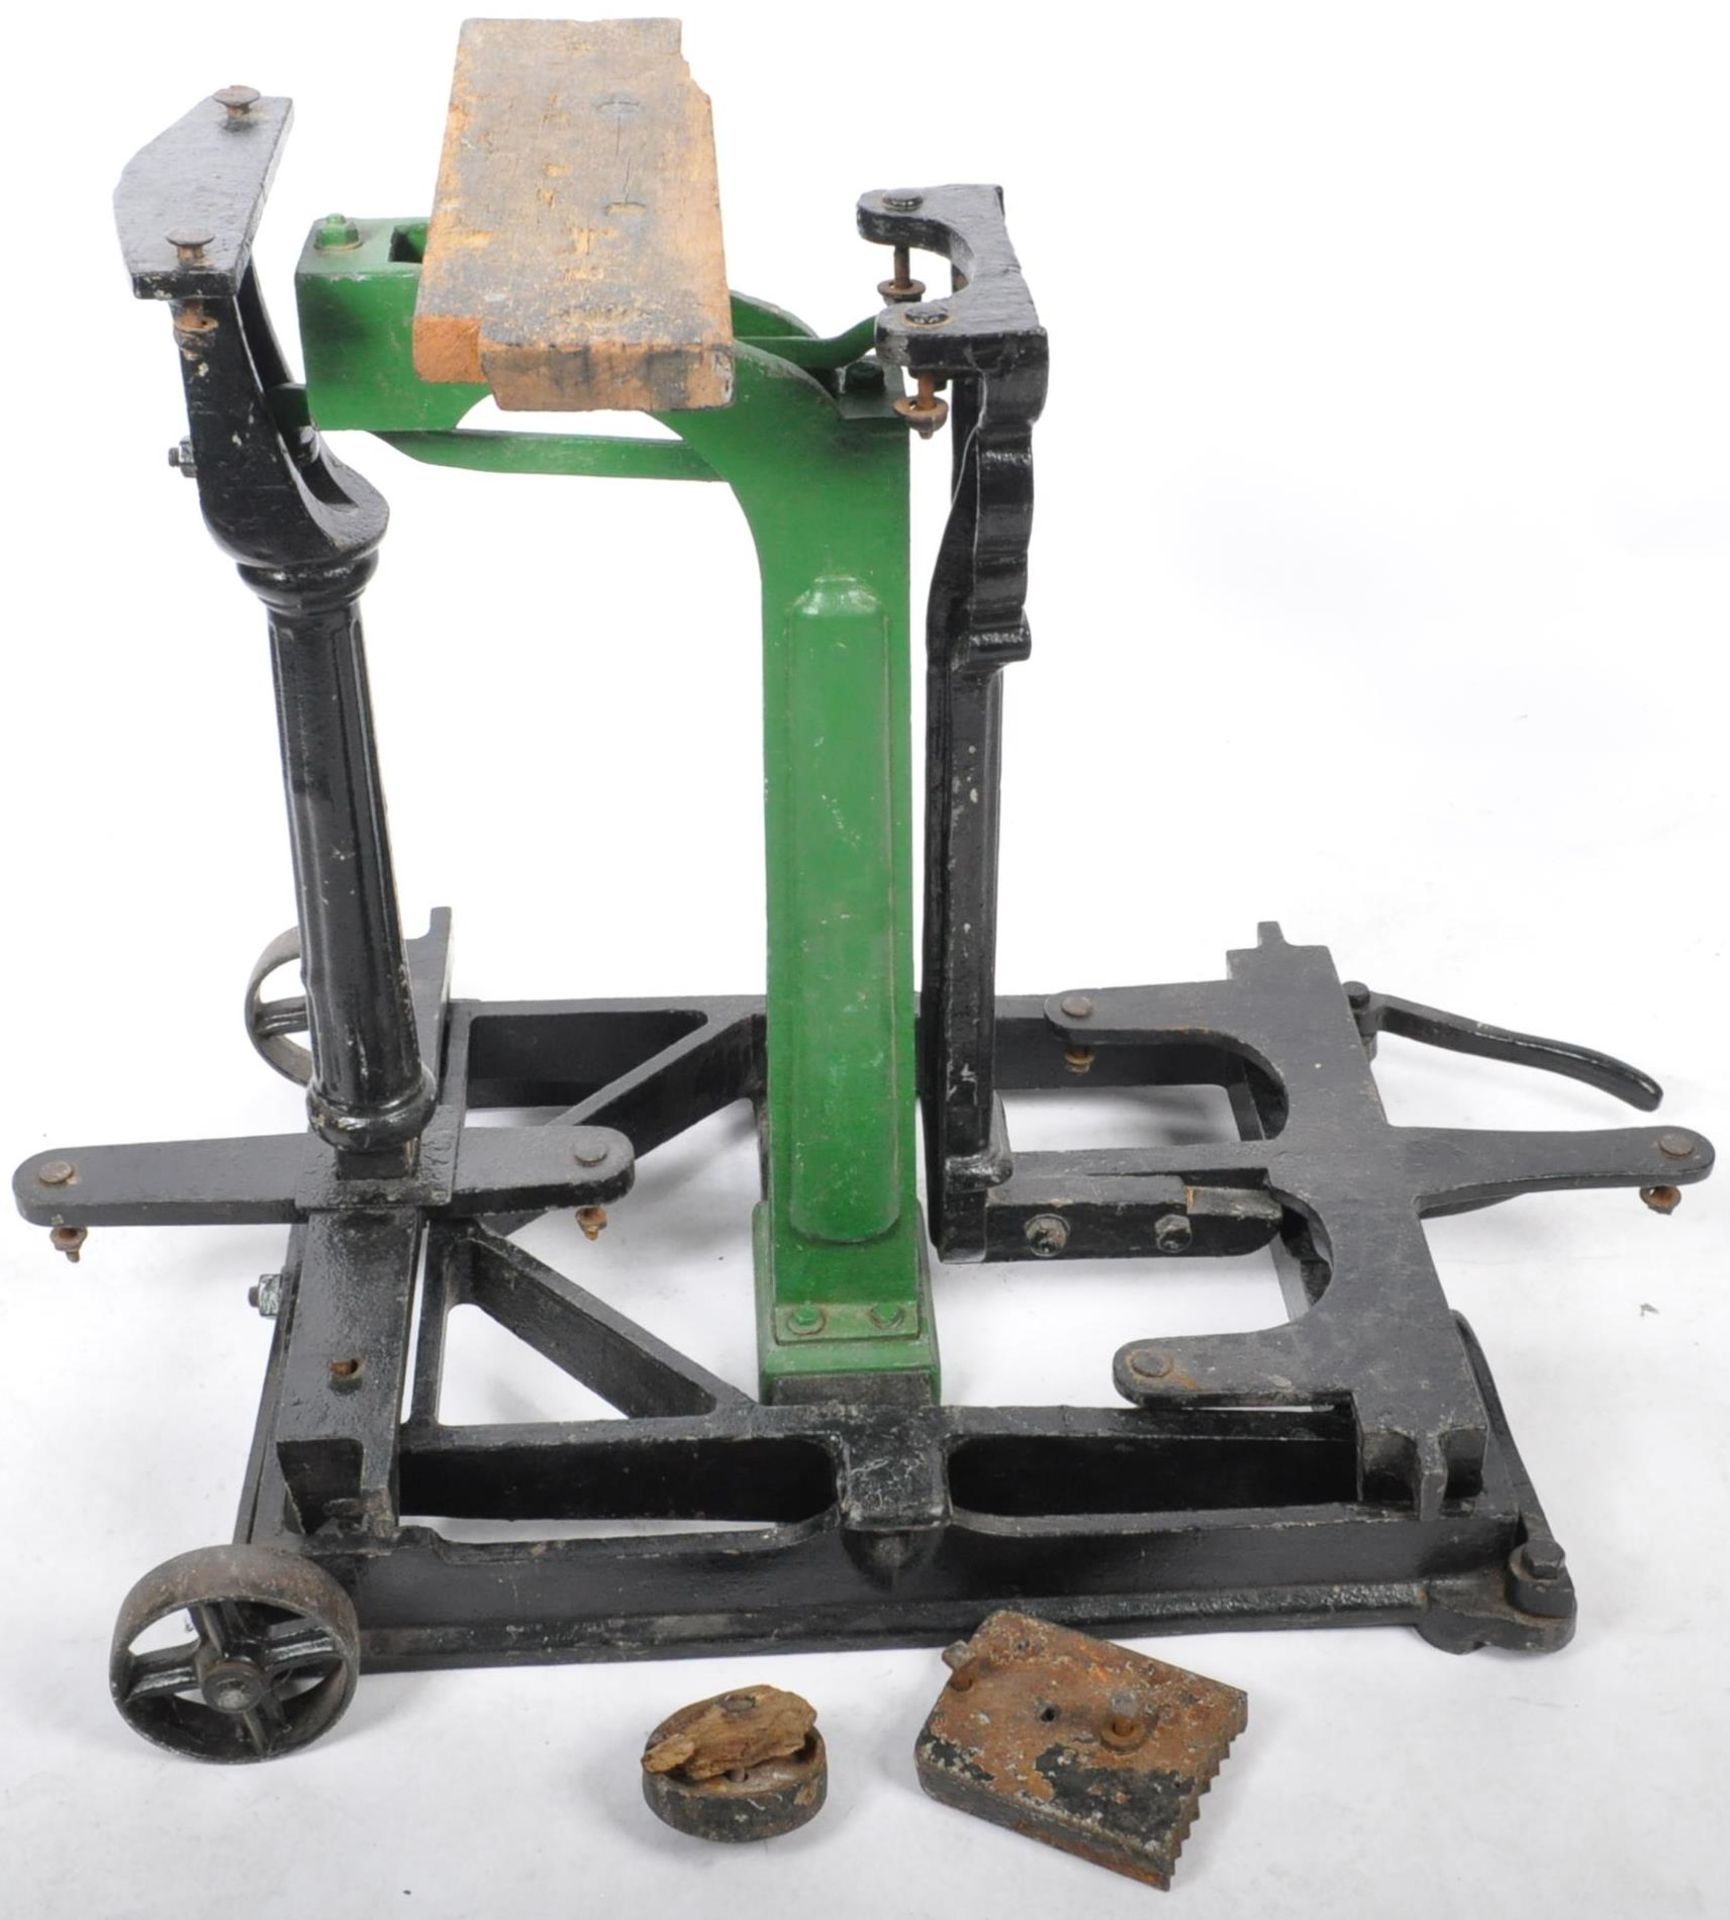 BRISTOL PORT HEAVY CAST IRON CUSTOMS & EXCISE WEIGHING SCALES - Image 2 of 6